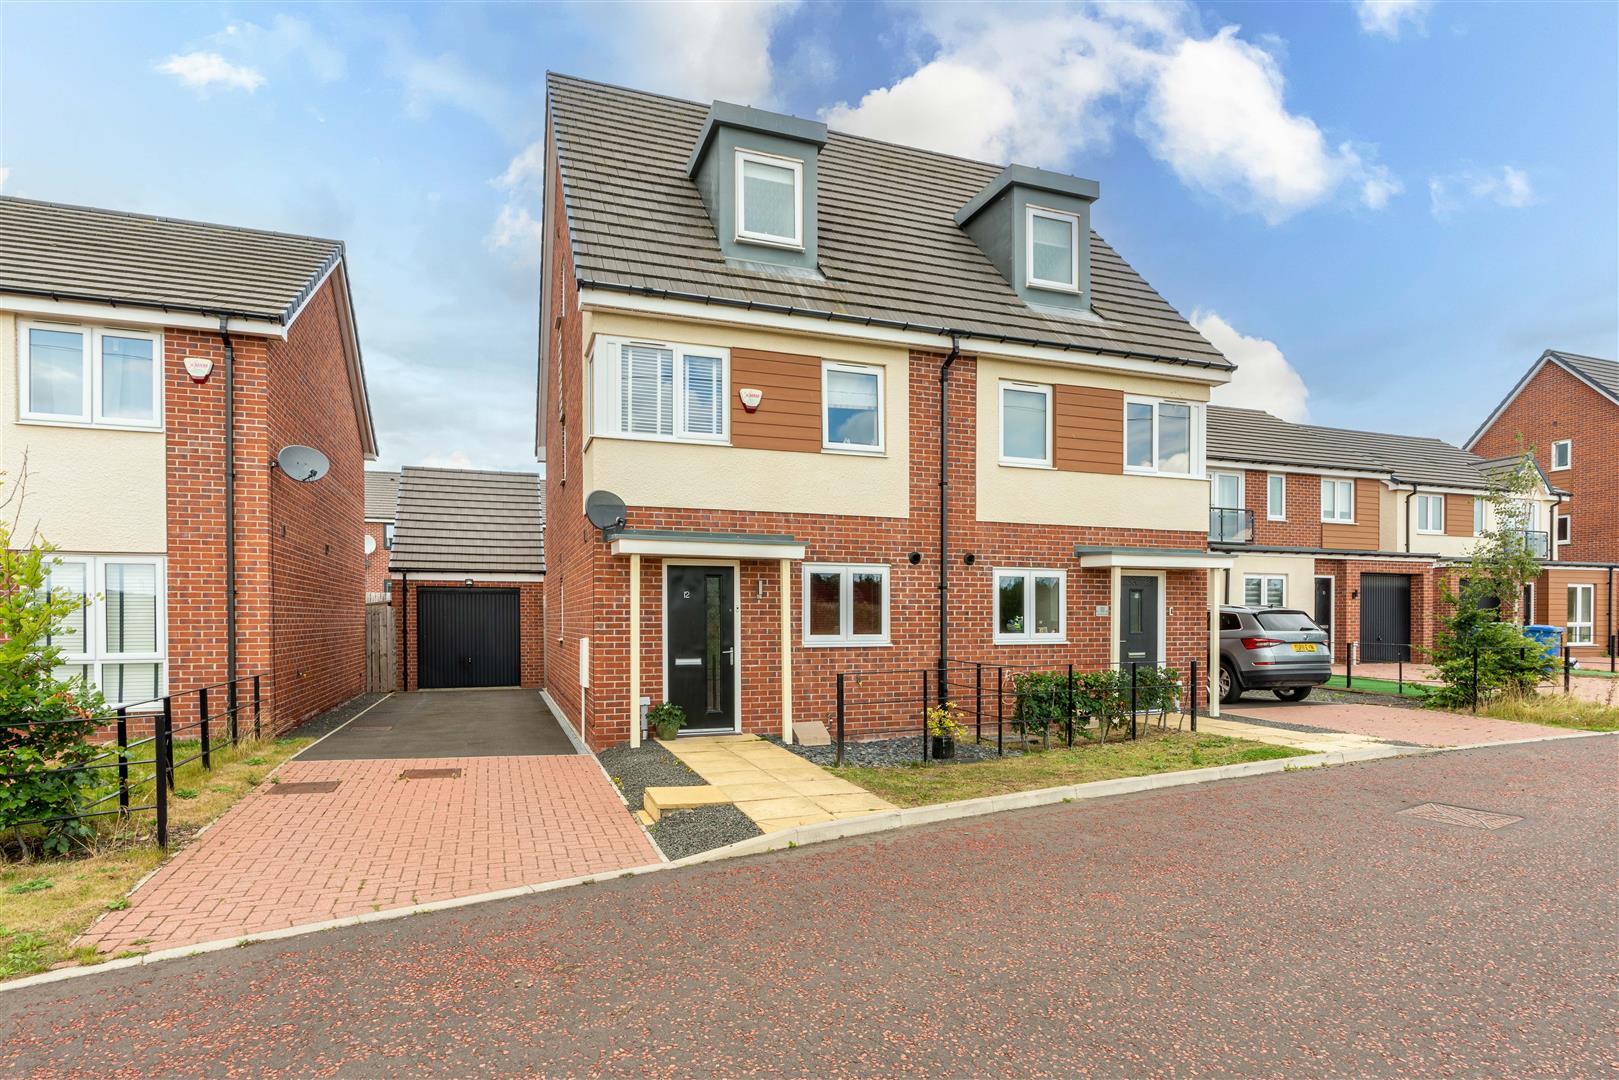 3 bed semi-detached house for sale in Shotton View, Great Park, NE13